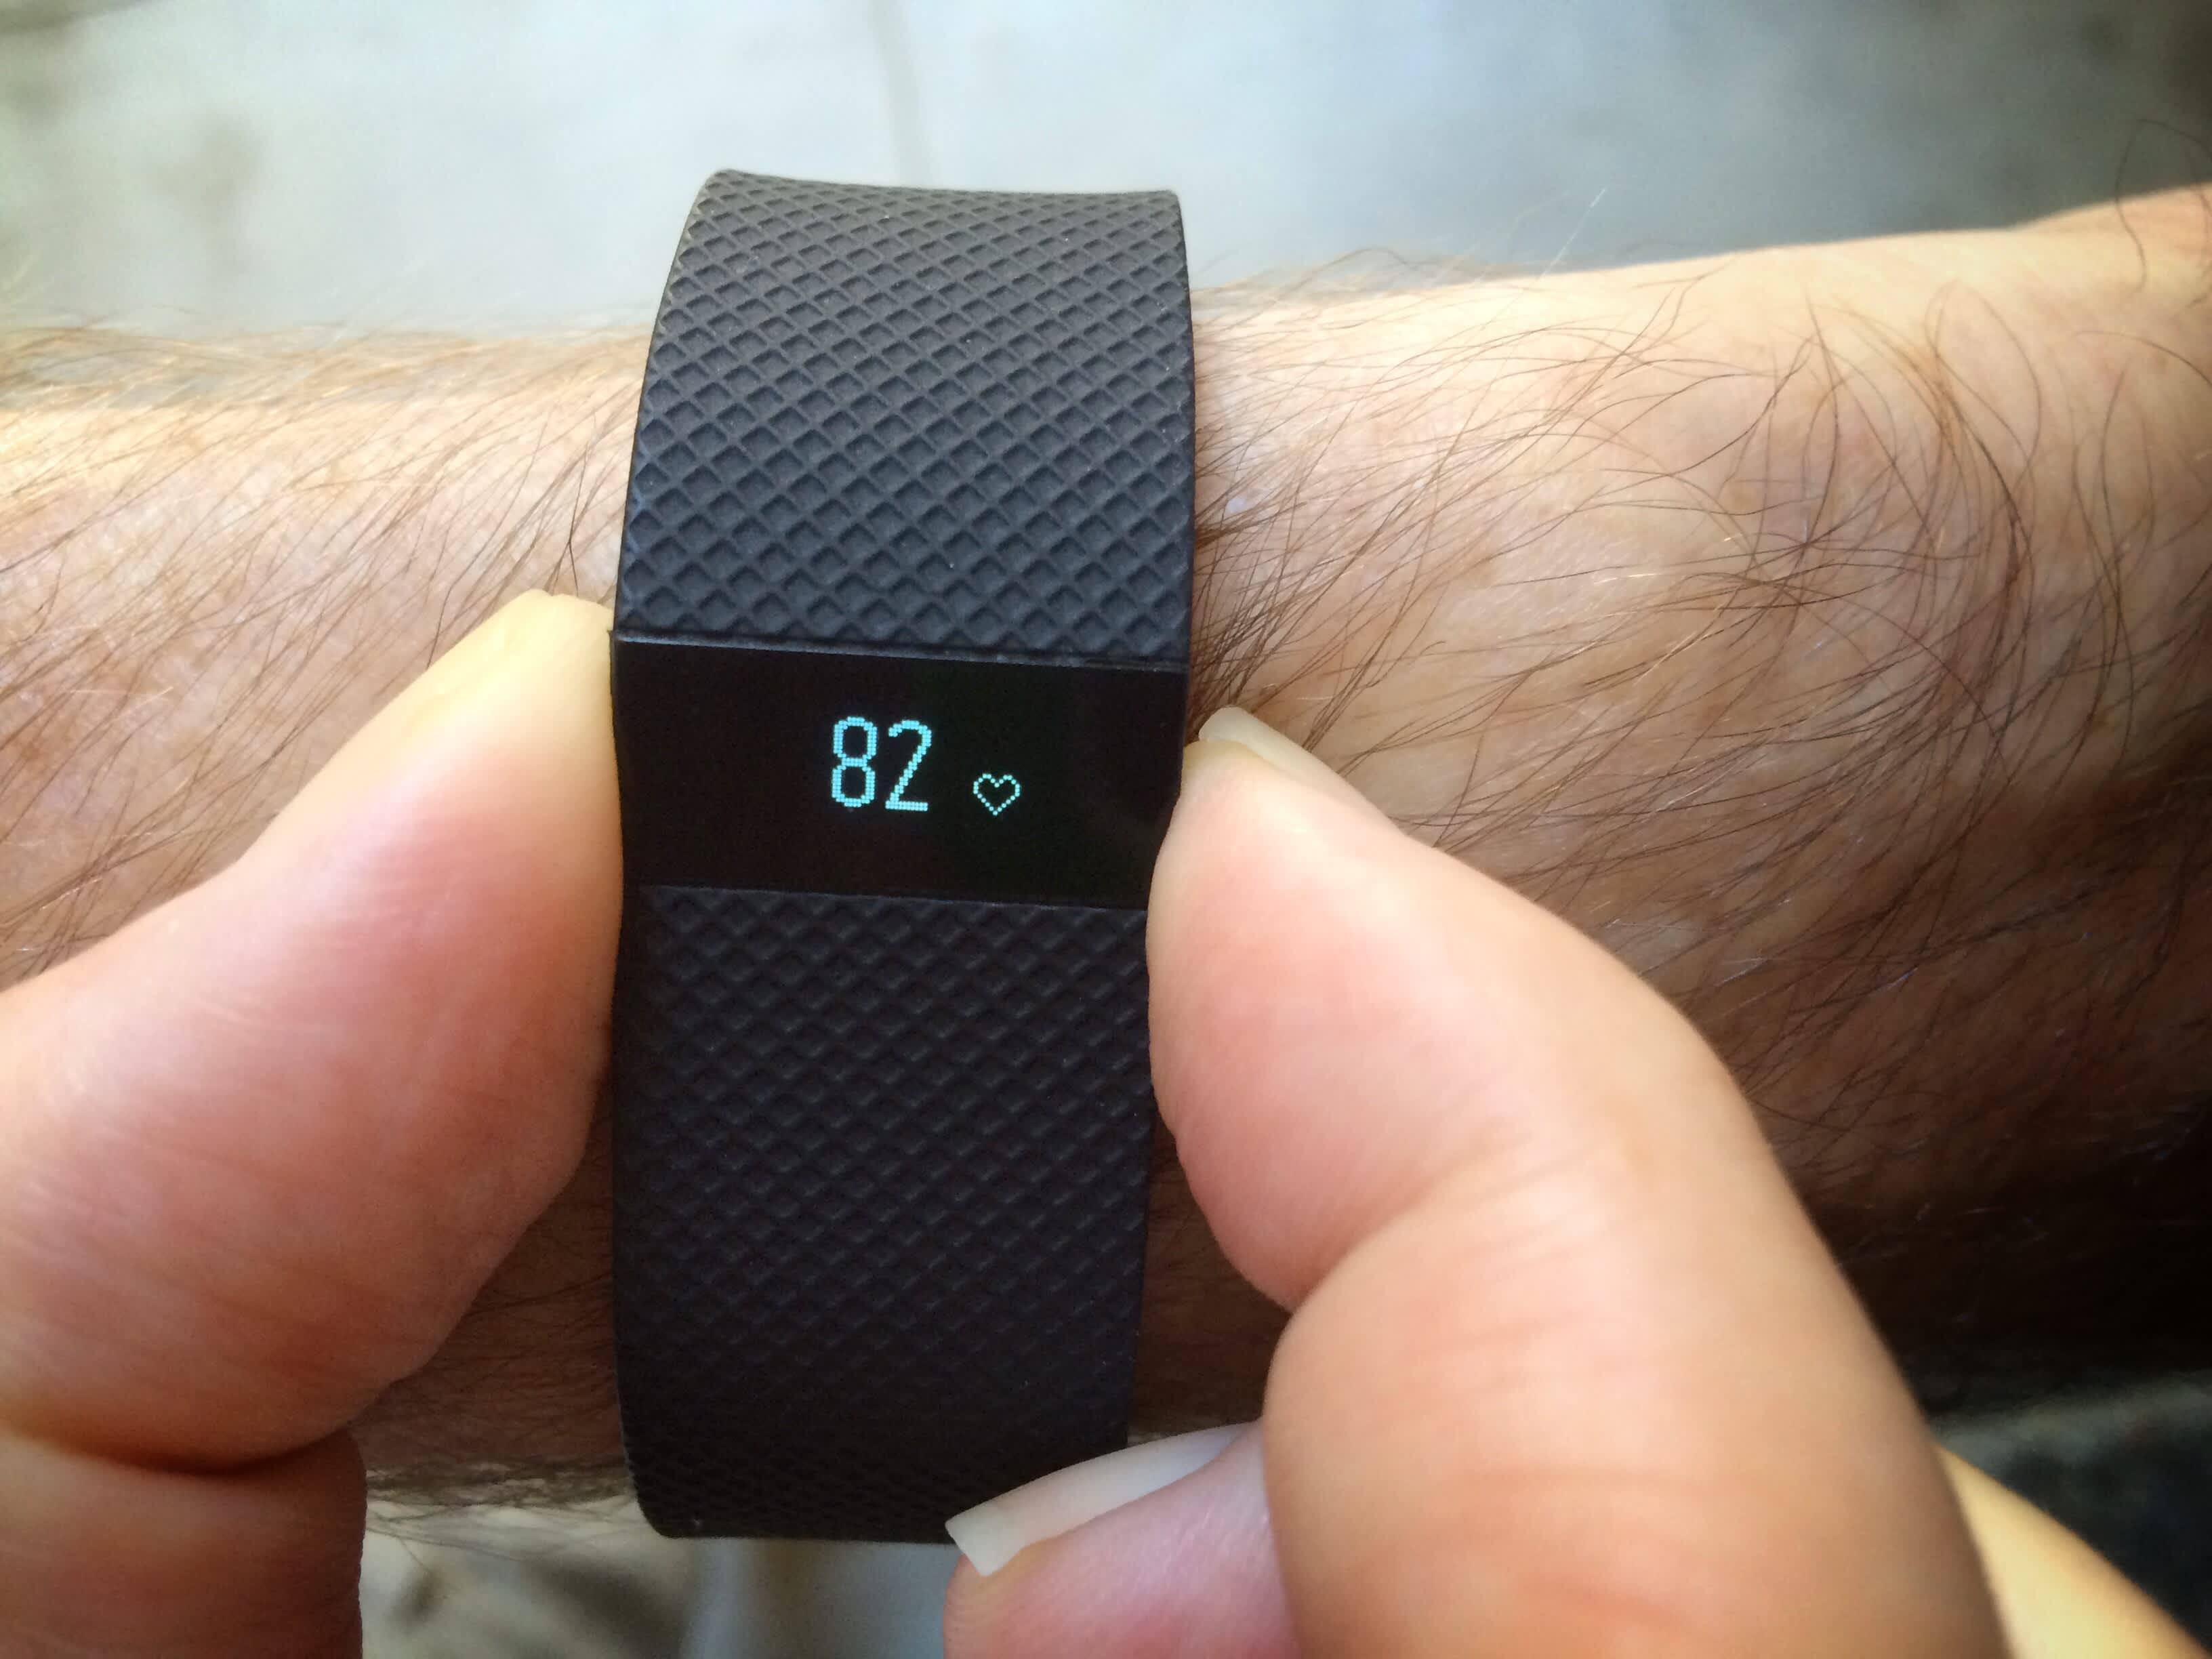 Starting Anew: A Guide To Resetting Fitbit Charge HR